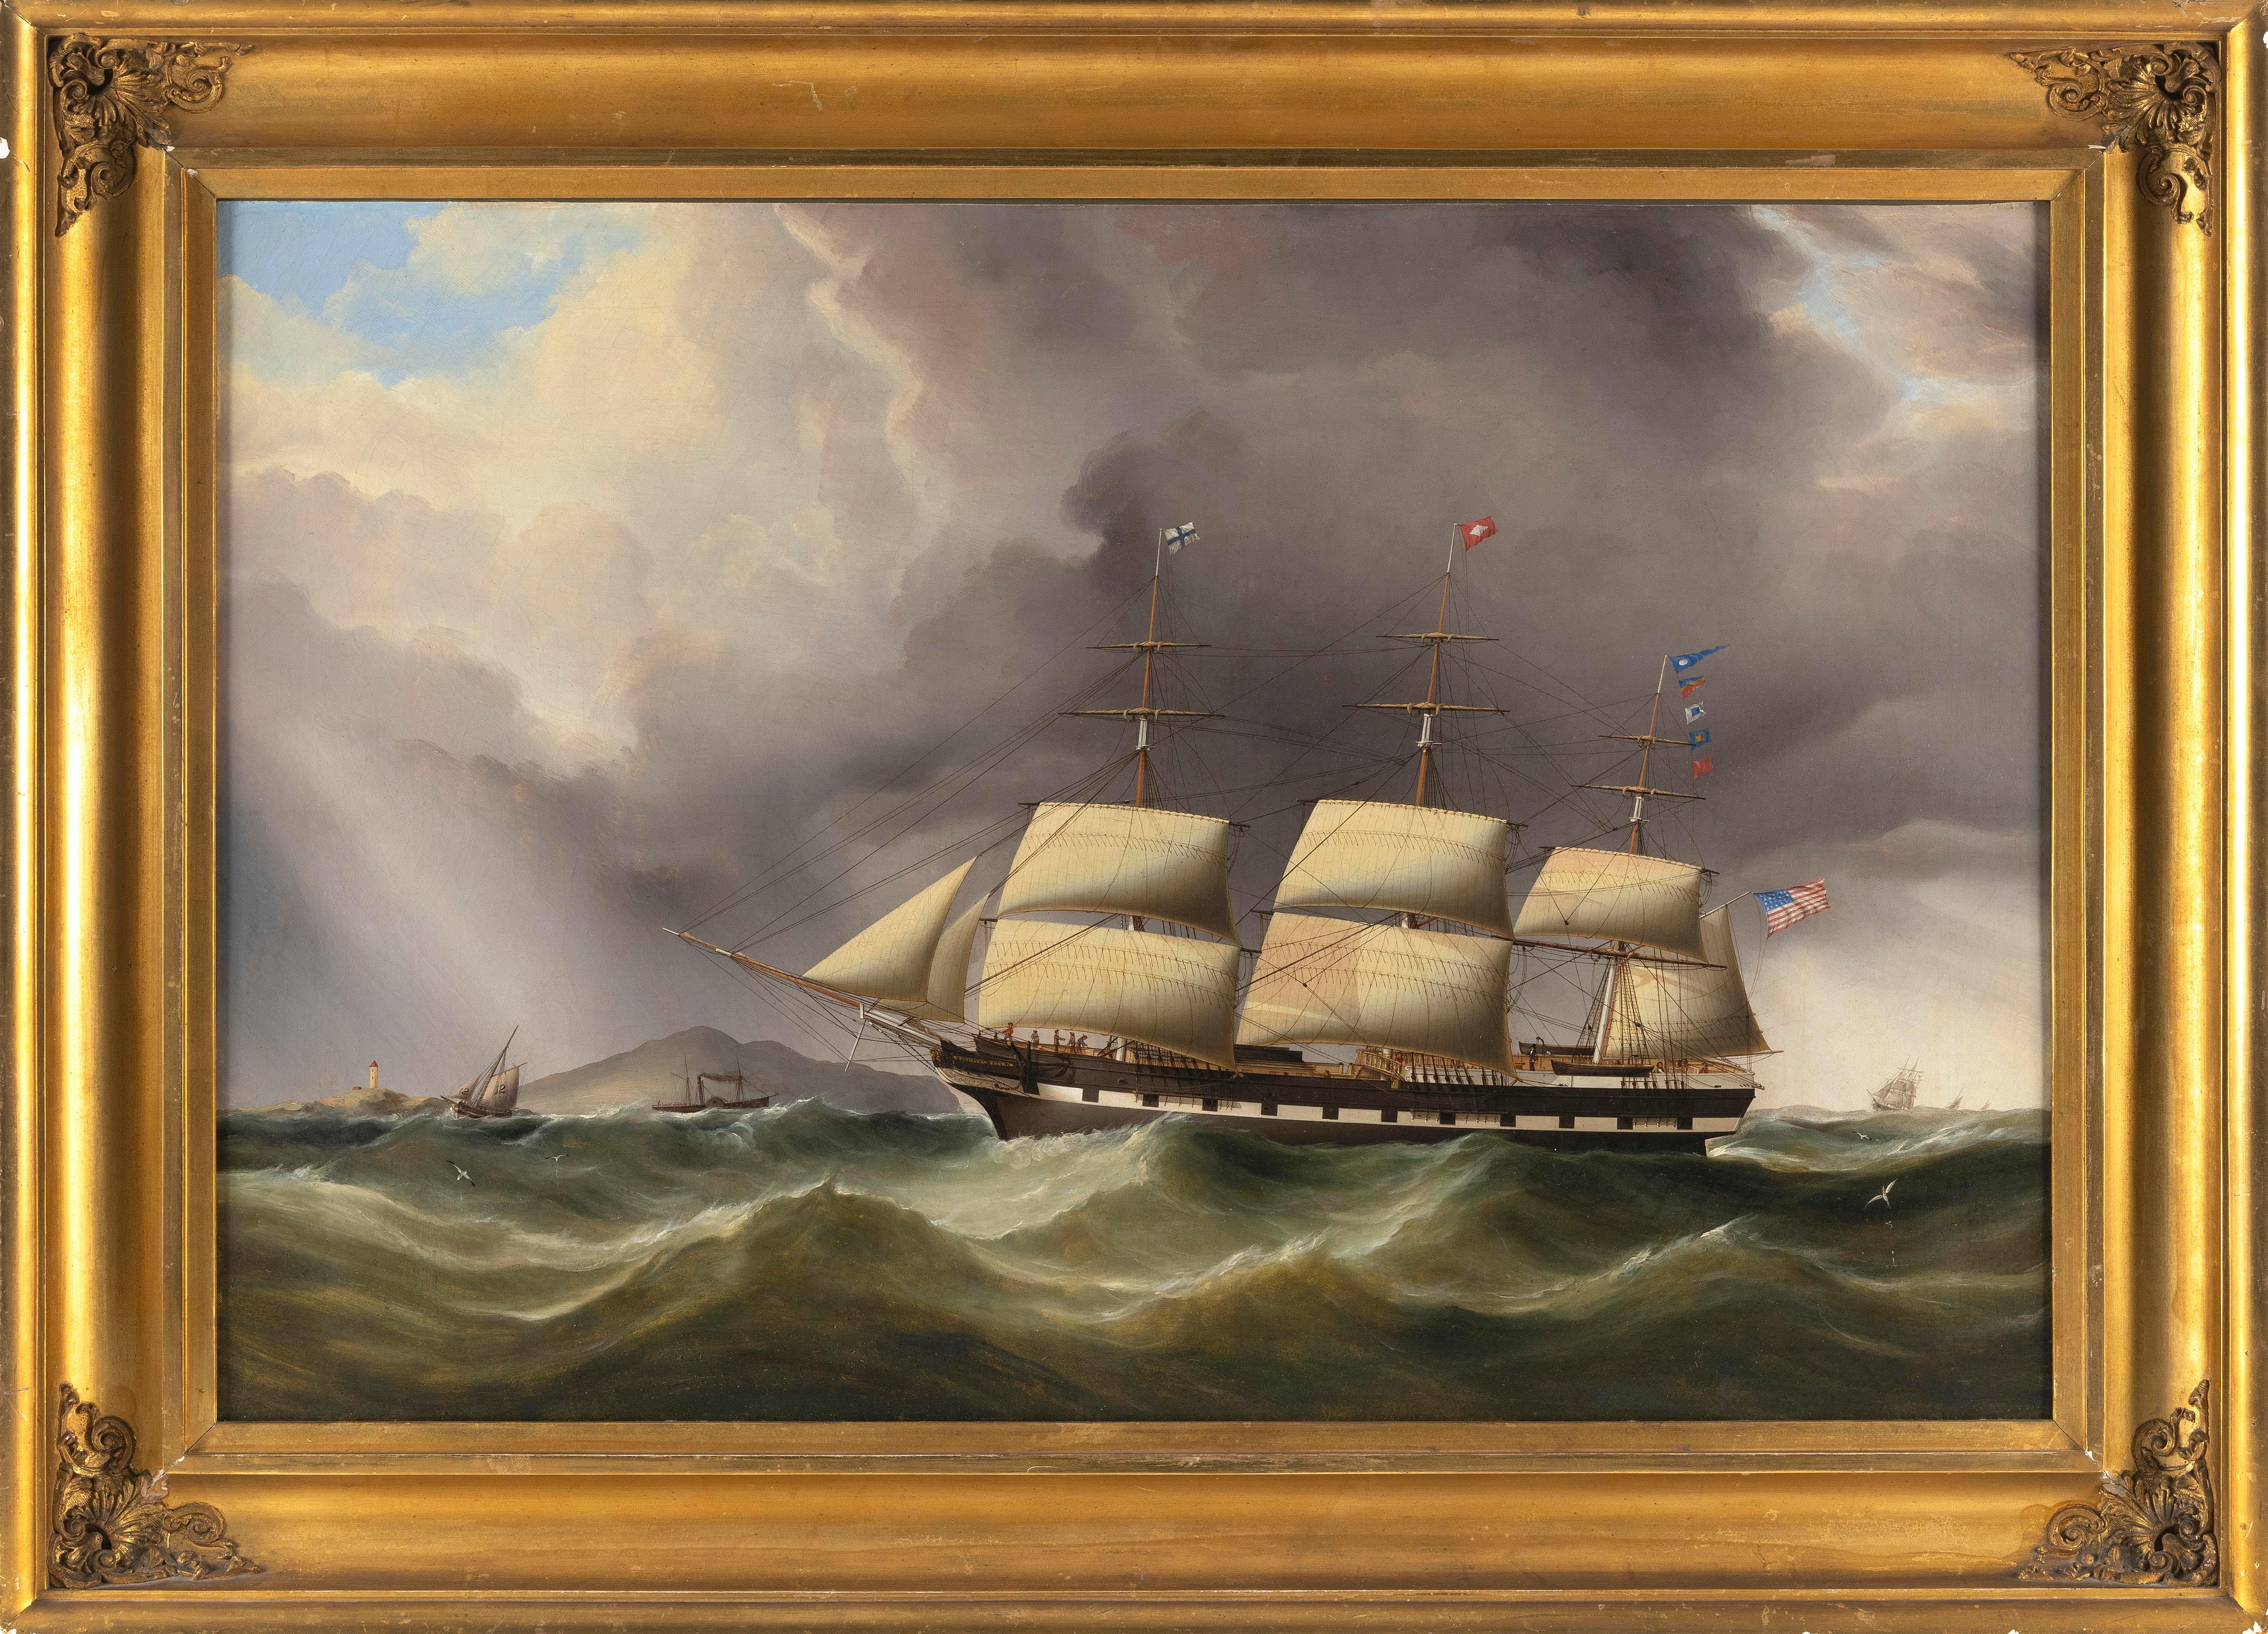 Duncan McFarlane.  This excellent ship portraitist began his life's work in Liverpool.  It is believed that he later sailed to America and was employed in the capacity of a ship and figure portraitist in Boston (one of his works was published by